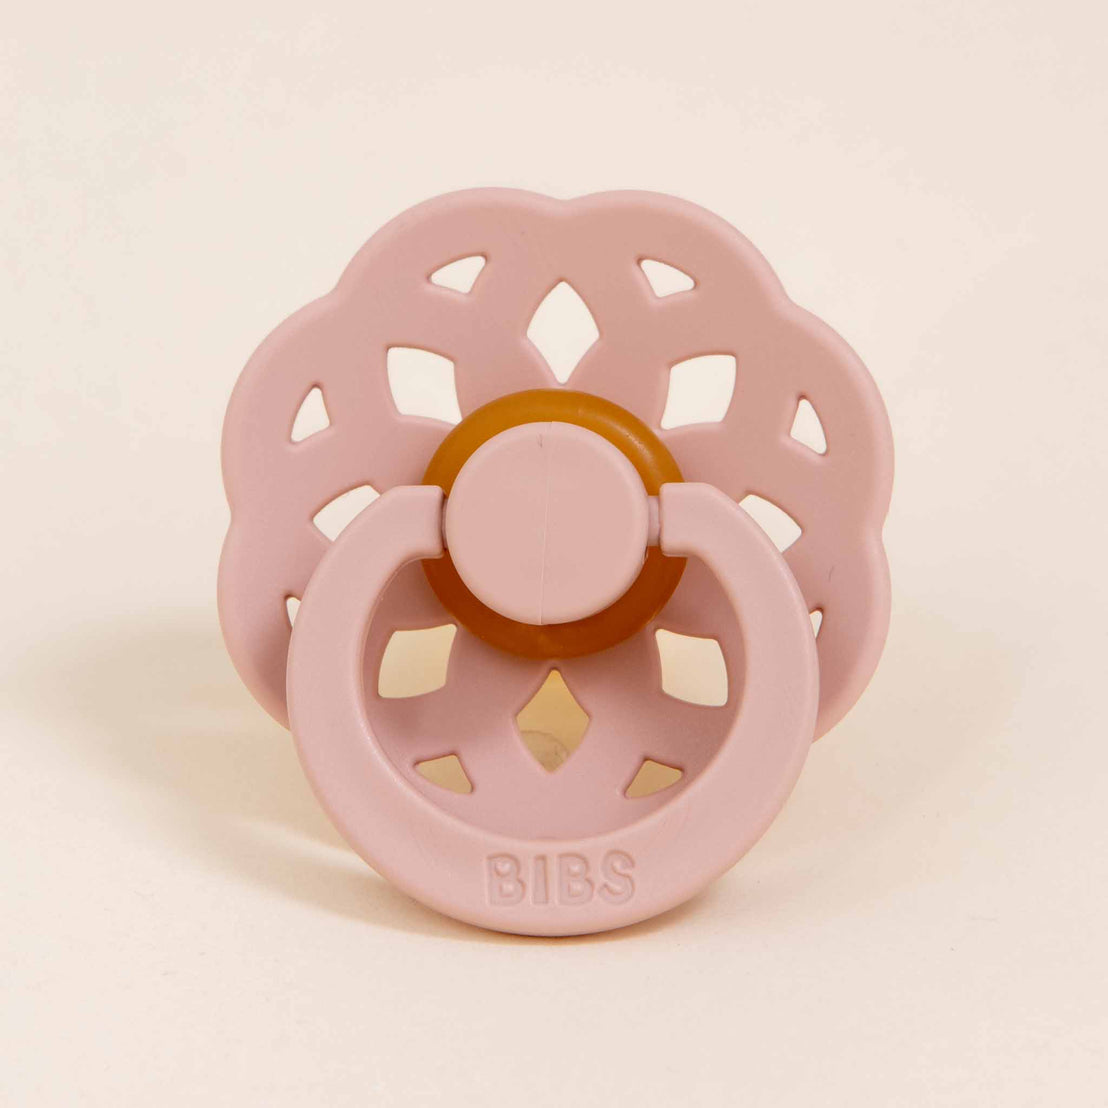 Bibs rubber pacifier in Blush color.